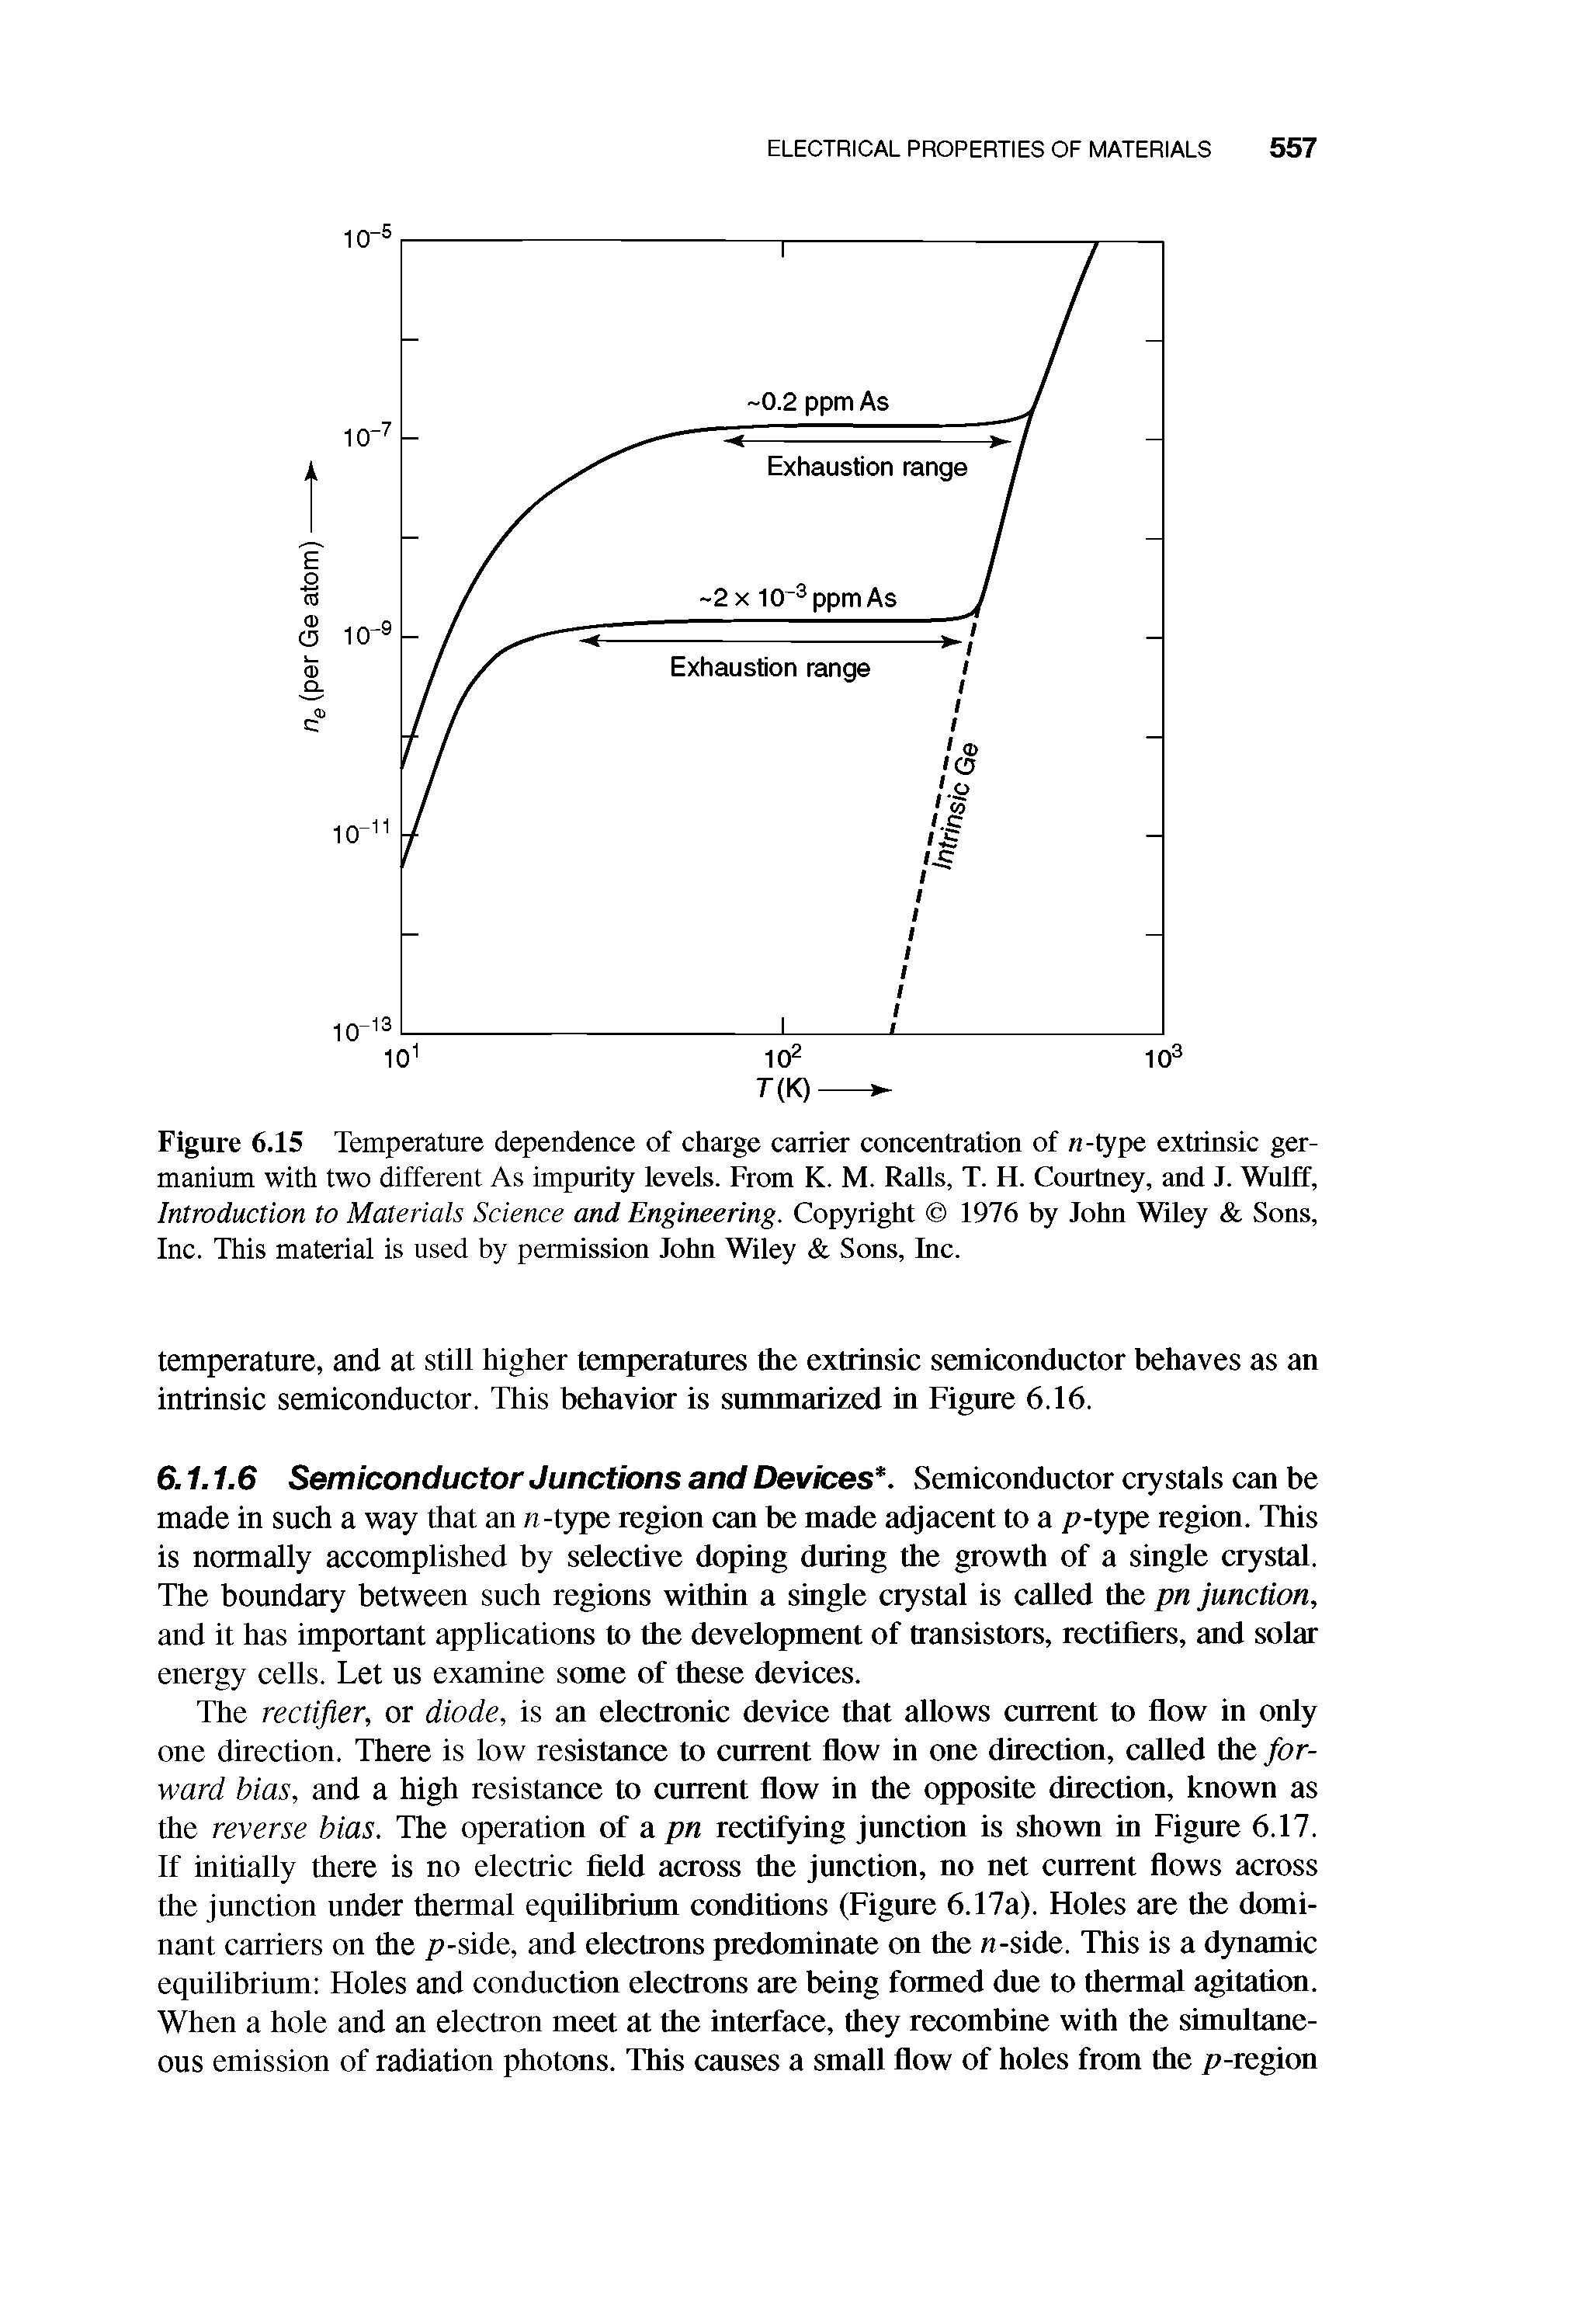 Figure 6.15 Temperature dependence of charge carrier concentration of -type extrinsic germanium with two different As impurity levels. From K. M. Ralls, T. H. Courtney, and J. Wulff, Introduction to Materials Science and Engineering. Copyright 1976 by lohn Wiley Sons, Inc. This material is used by permission lohn Wiley Sons, Inc.